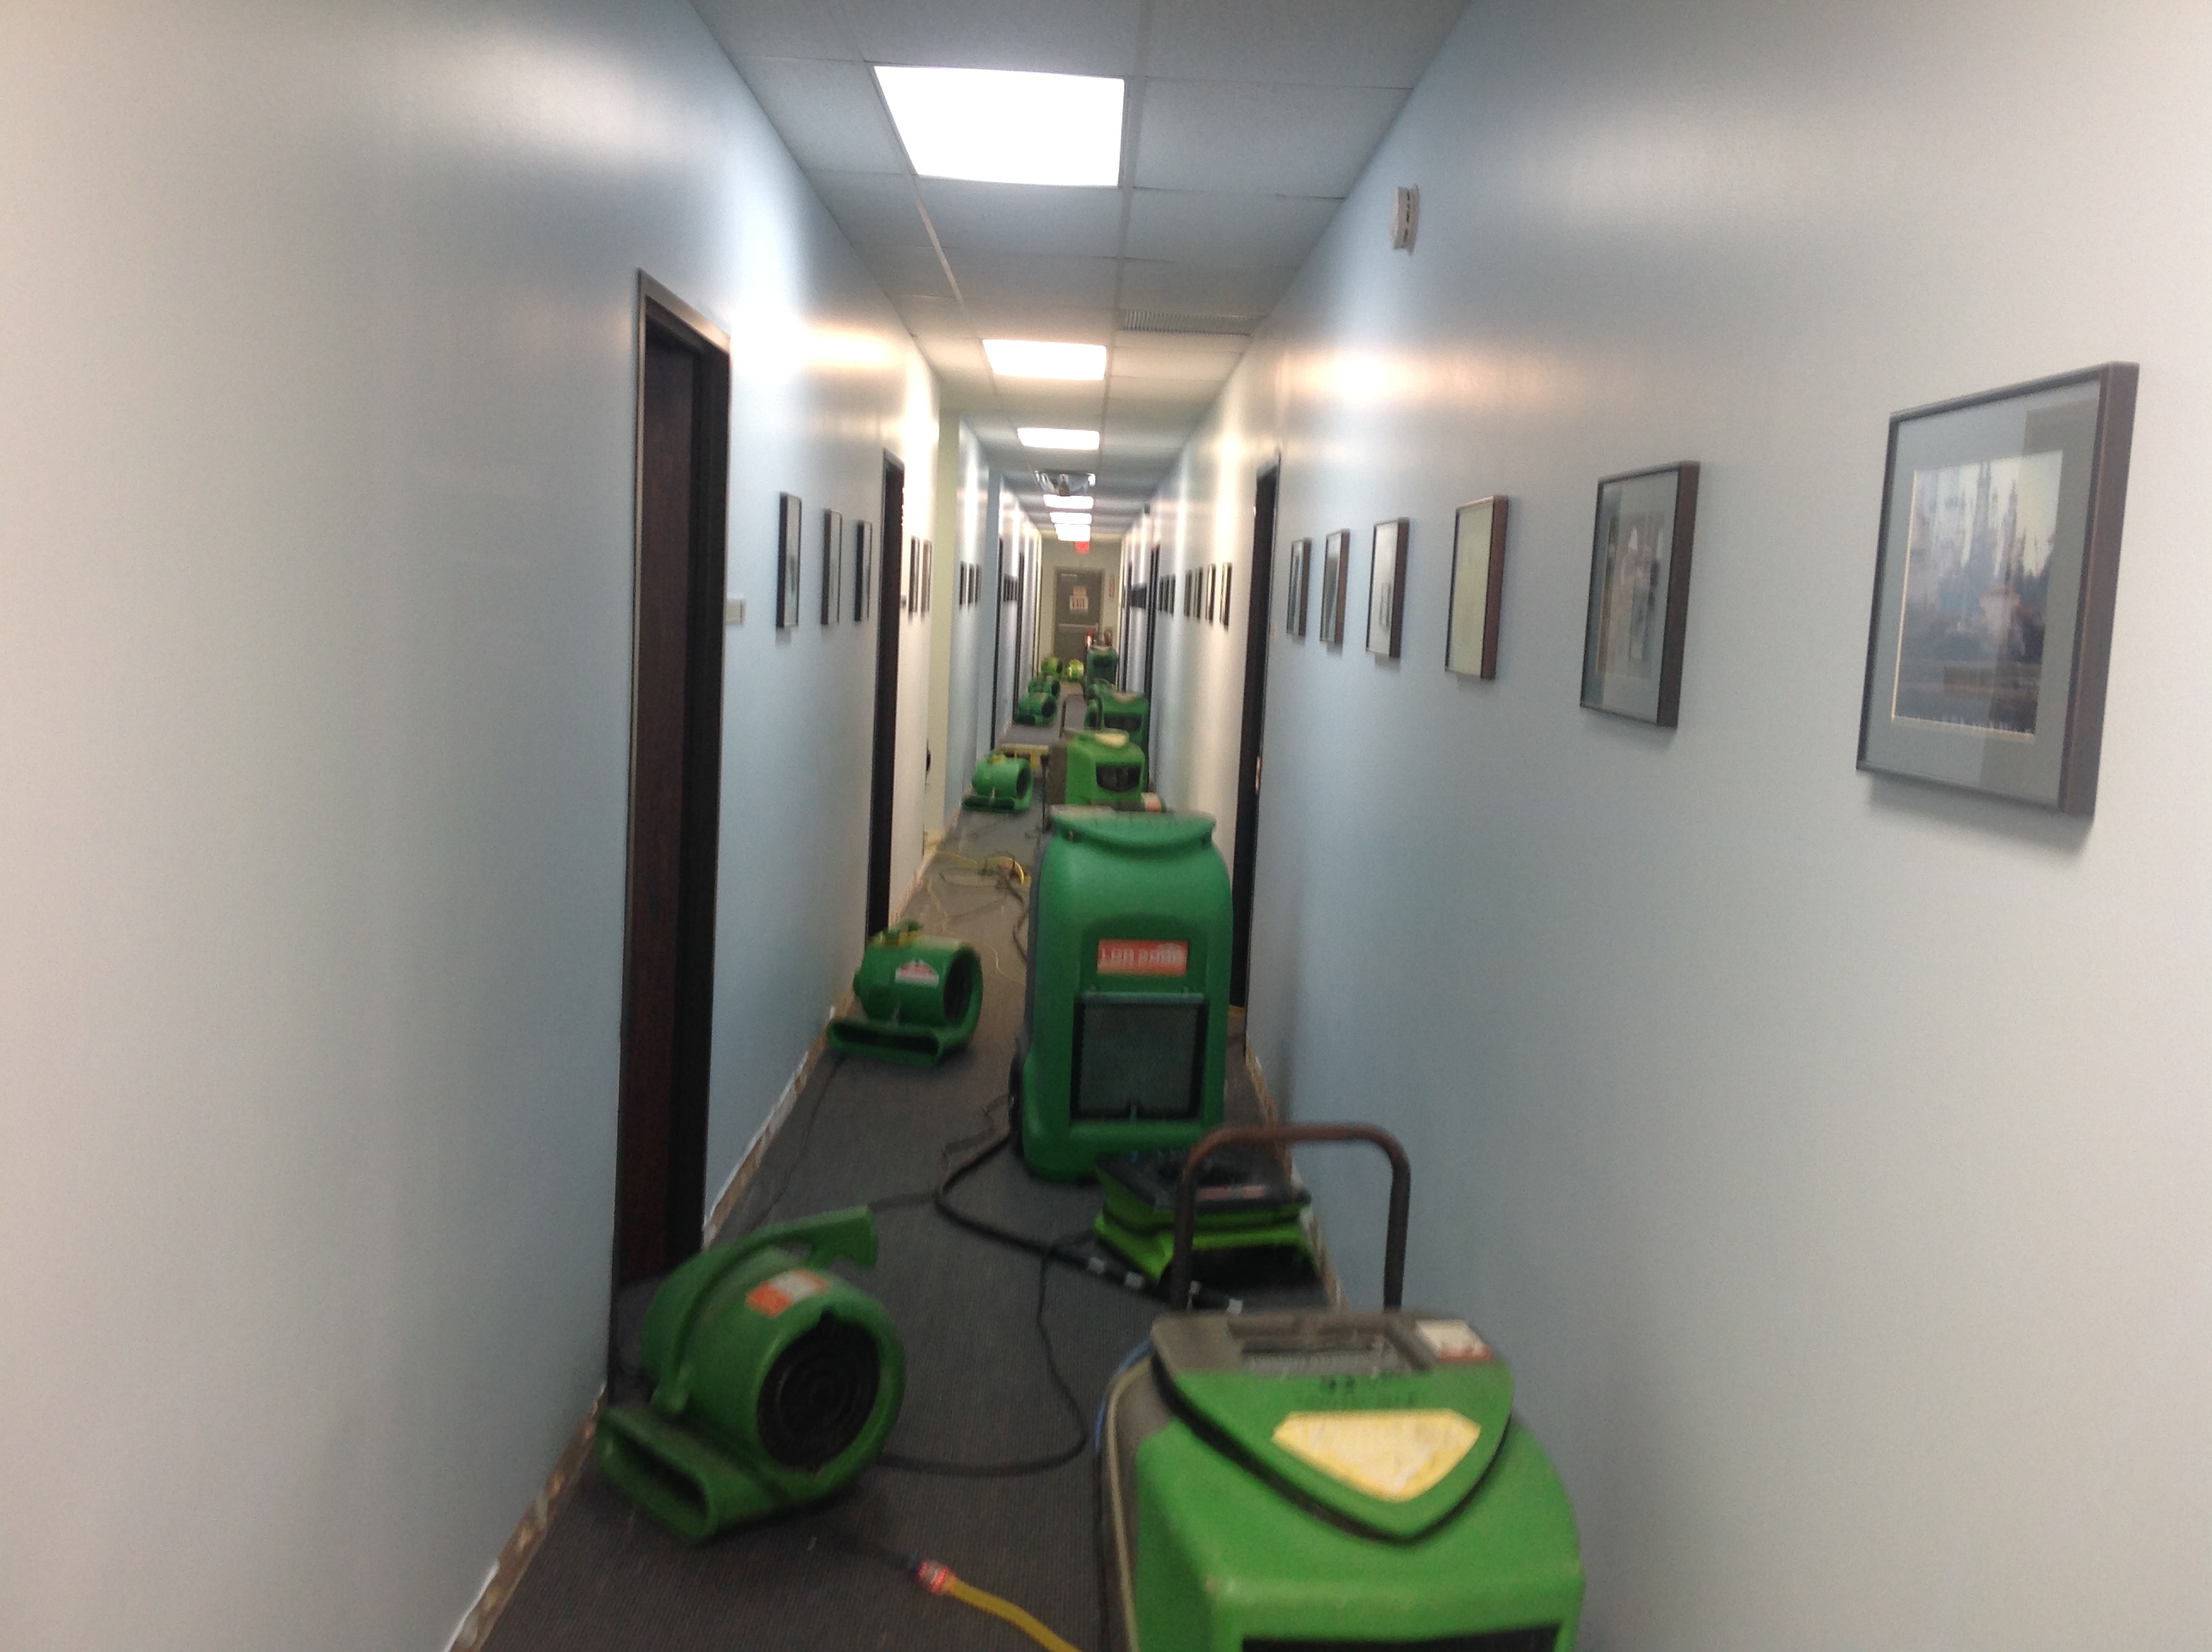 The SERVPRO equipment is up and running after a commercial water loss.